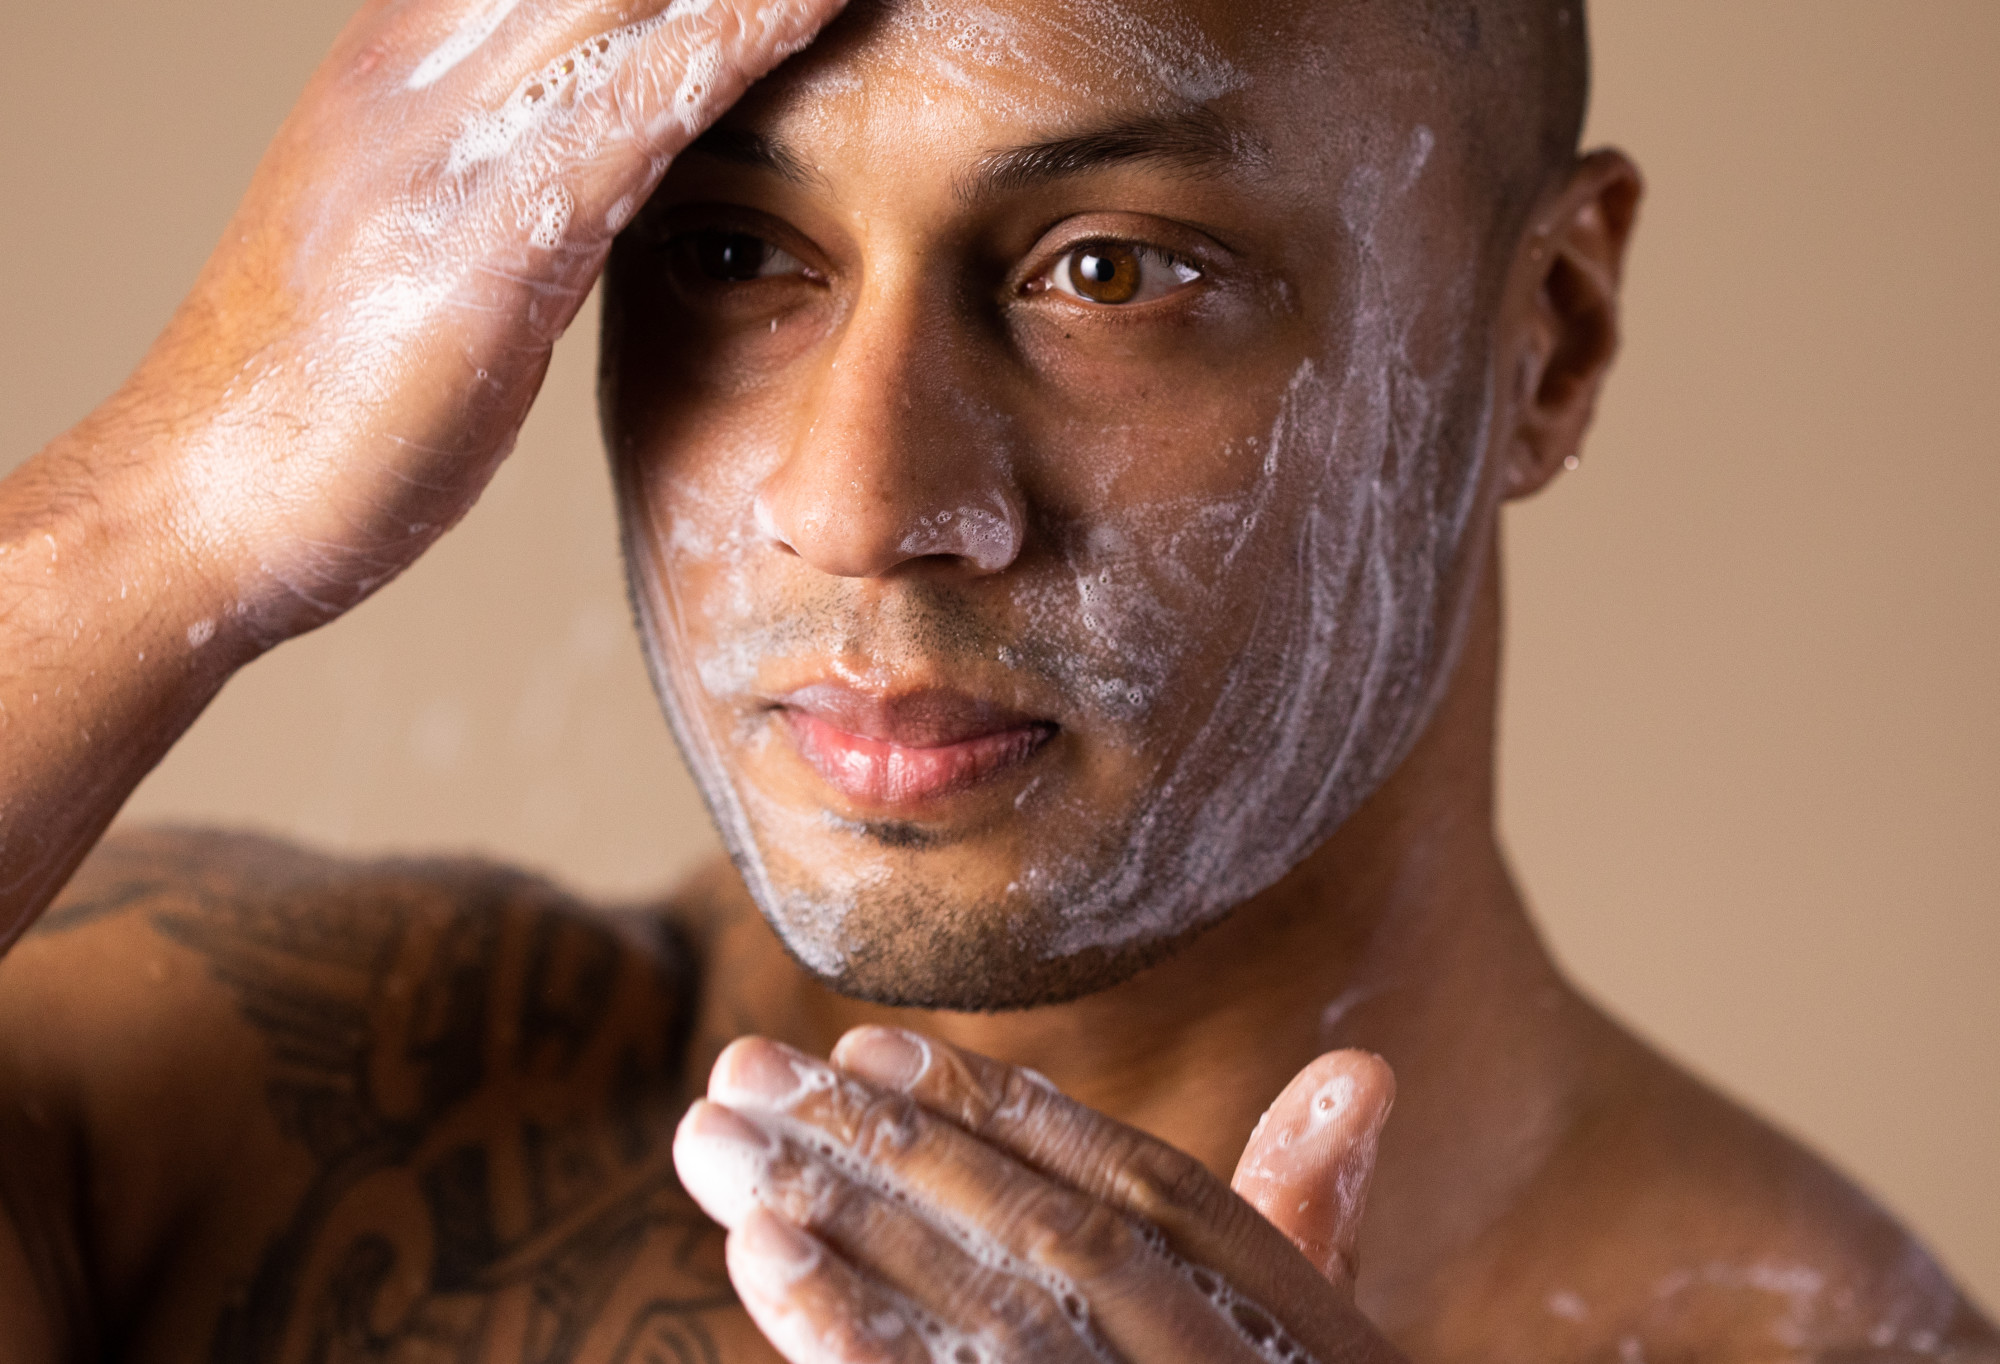 A bearded person's face is covered in whiteish soap suds, which are being rubbed into the skin at the forehead.